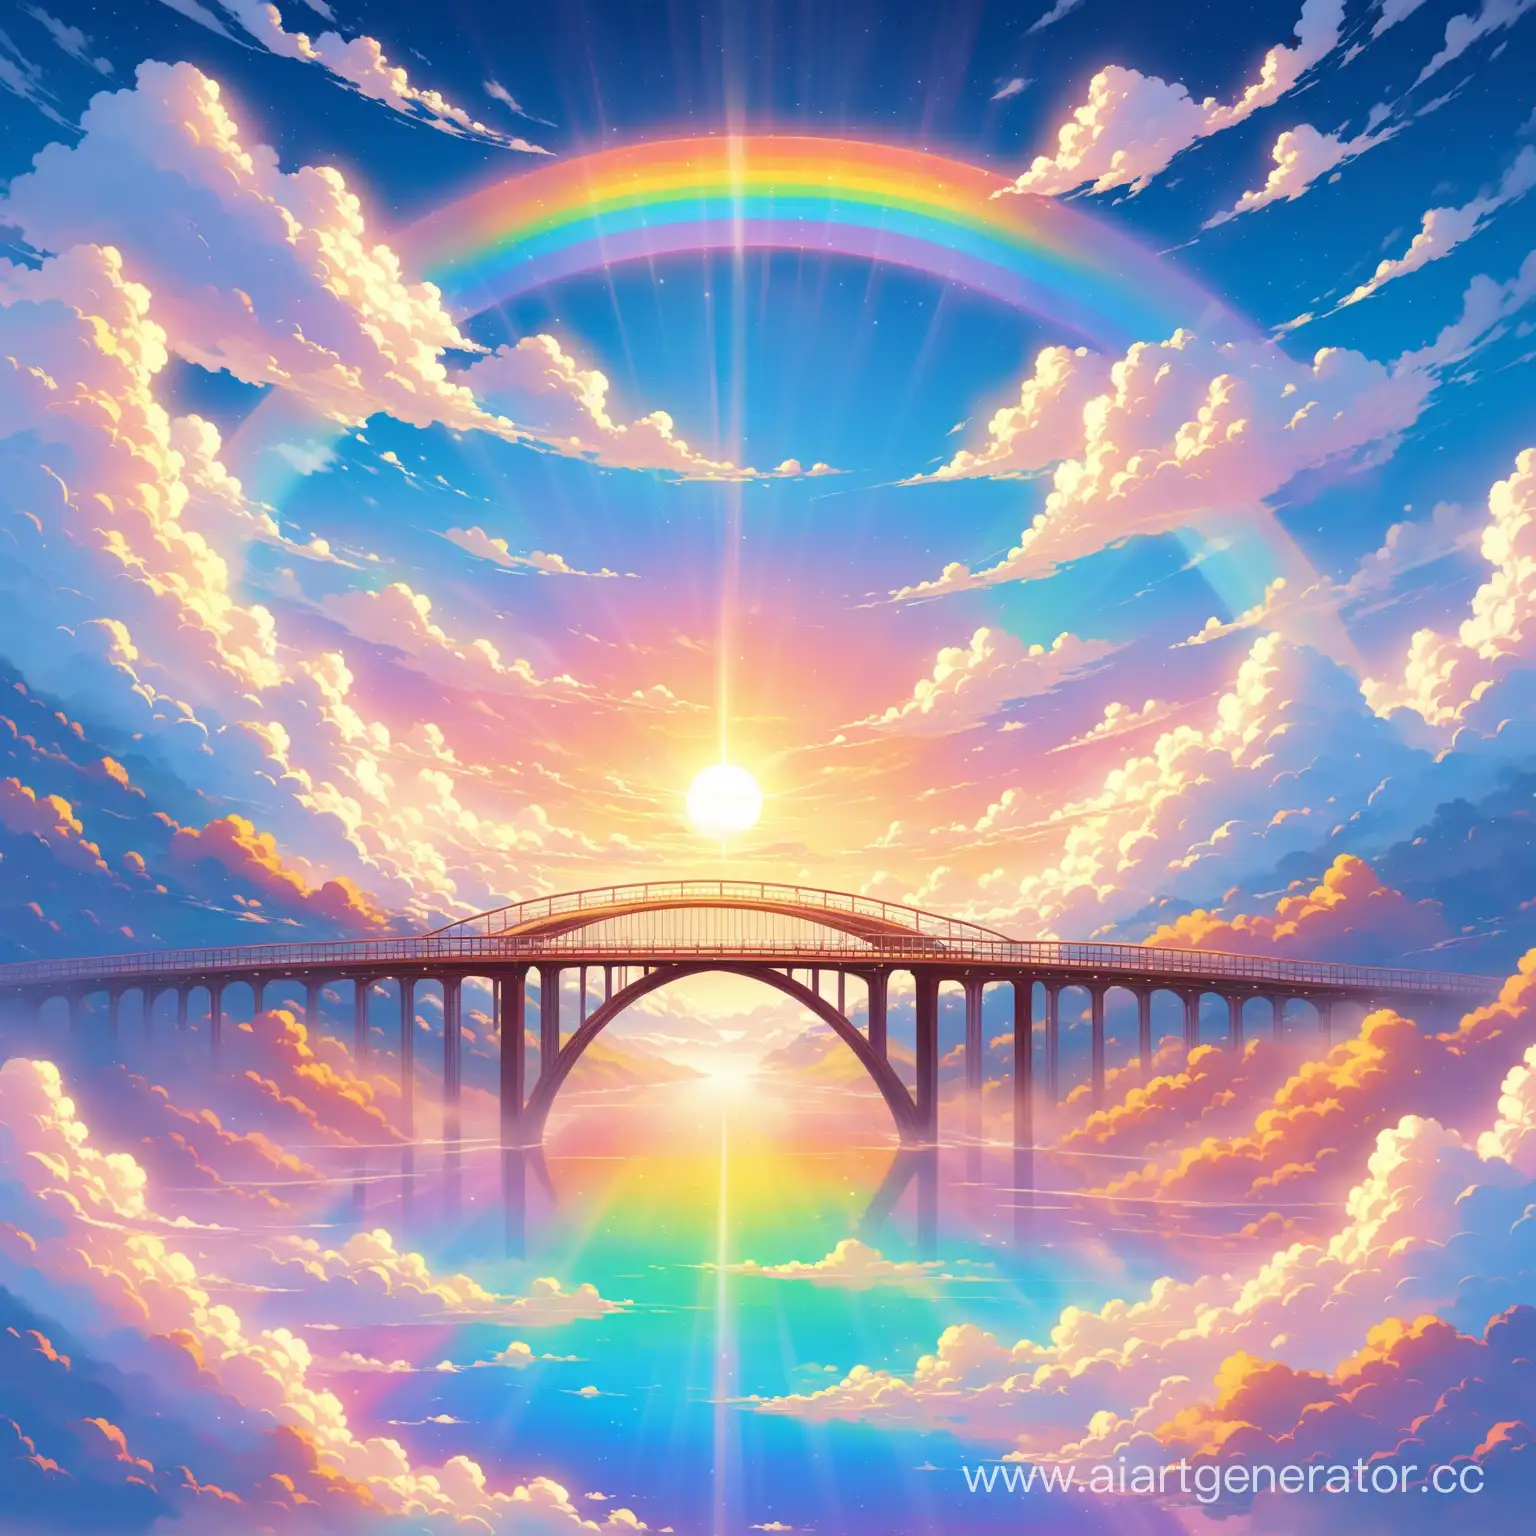 Ethereal-Bridge-Rainbow-Arching-Over-Cloudscape